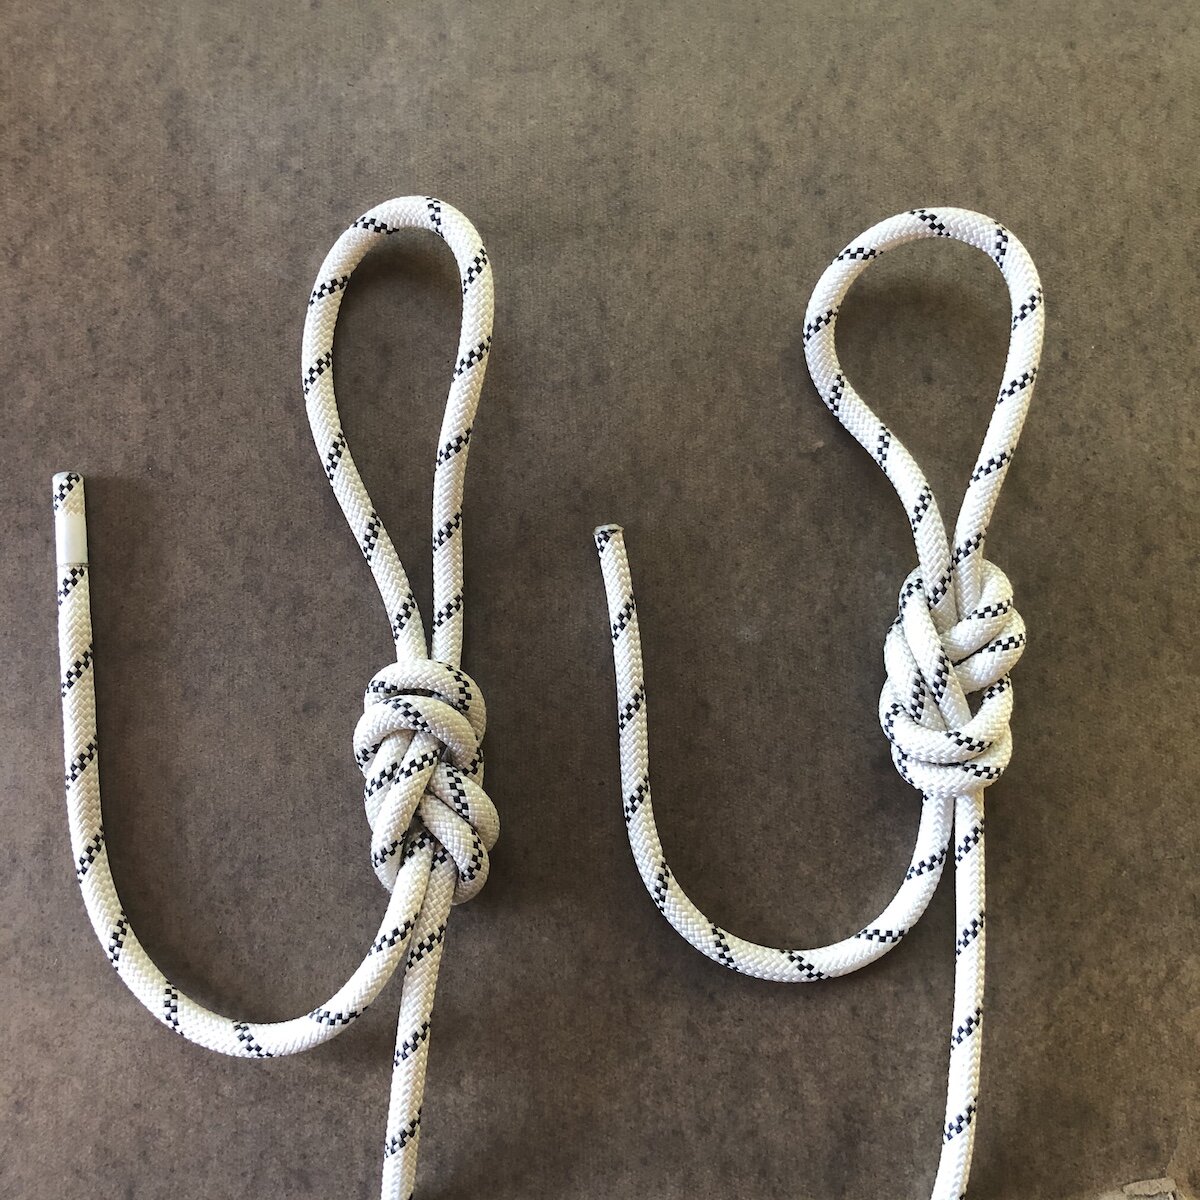 A better way to tie the figure 8? — Alpine Savvy